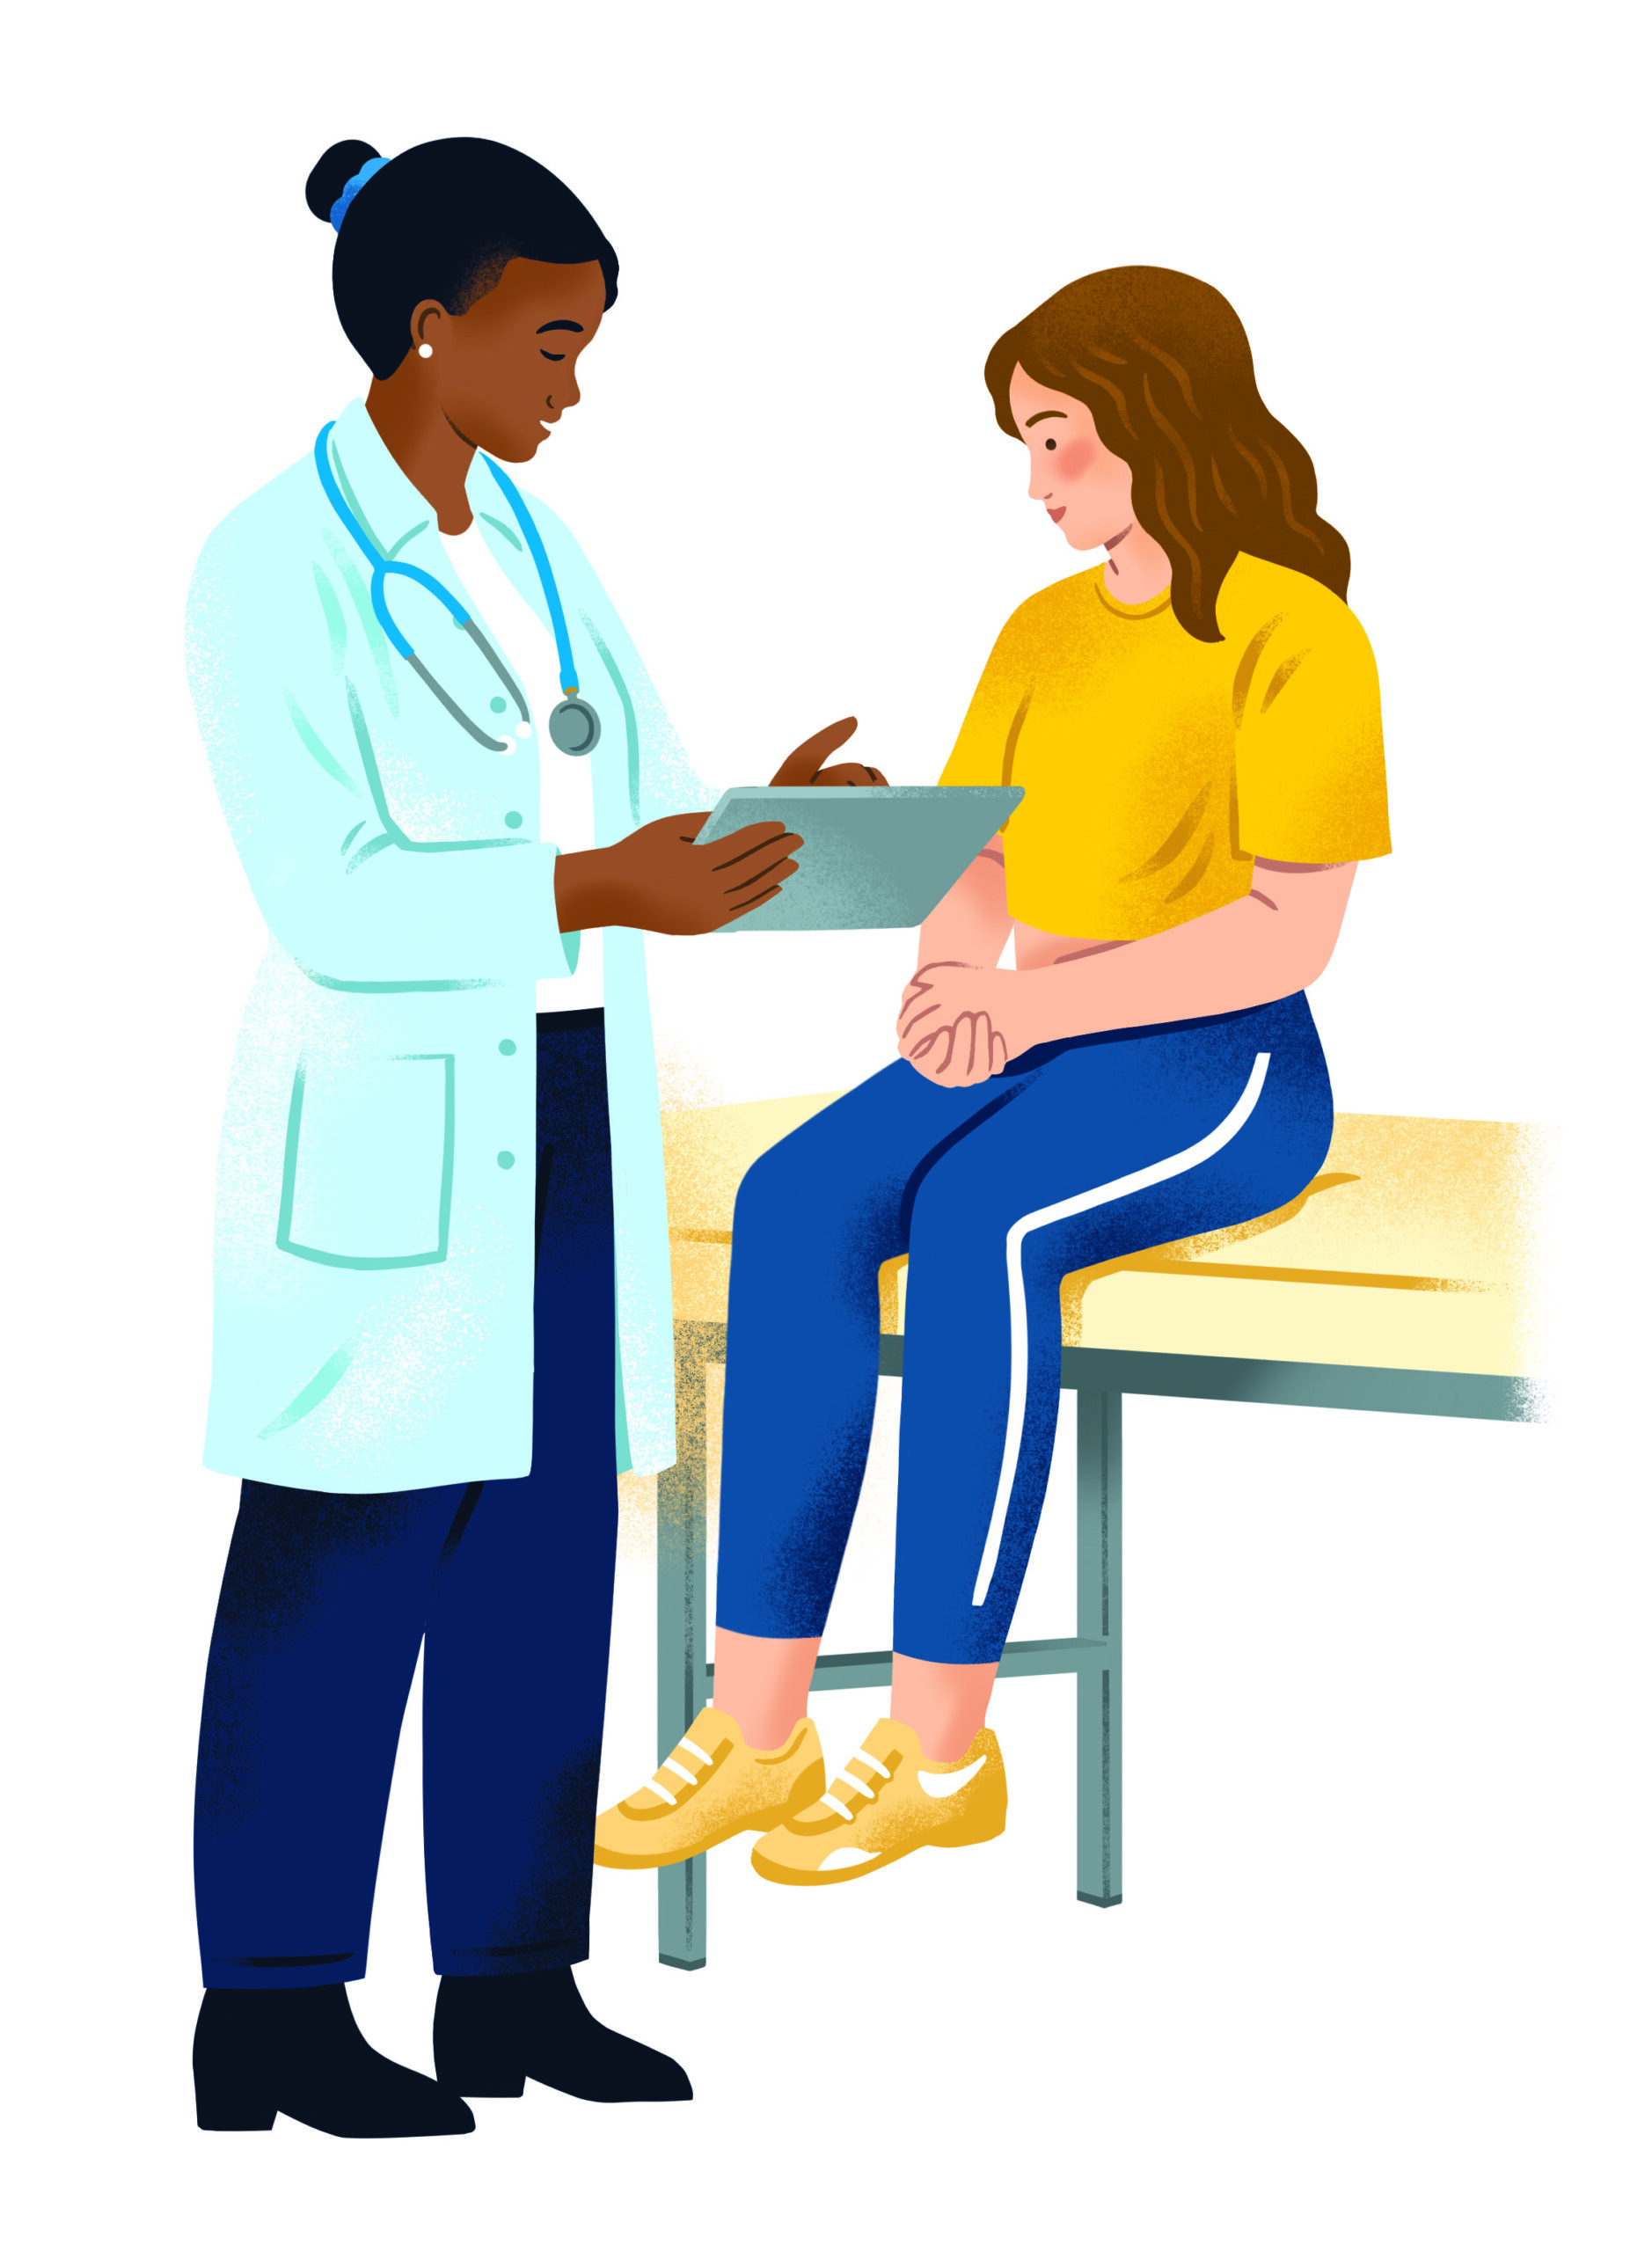 A Black woman doctor, left, in a light blue lab coat and dark blue pants, gestures to a clipboard while speaking to a white woman in blue pants and a yellow shirt who is sitting on an exam table.